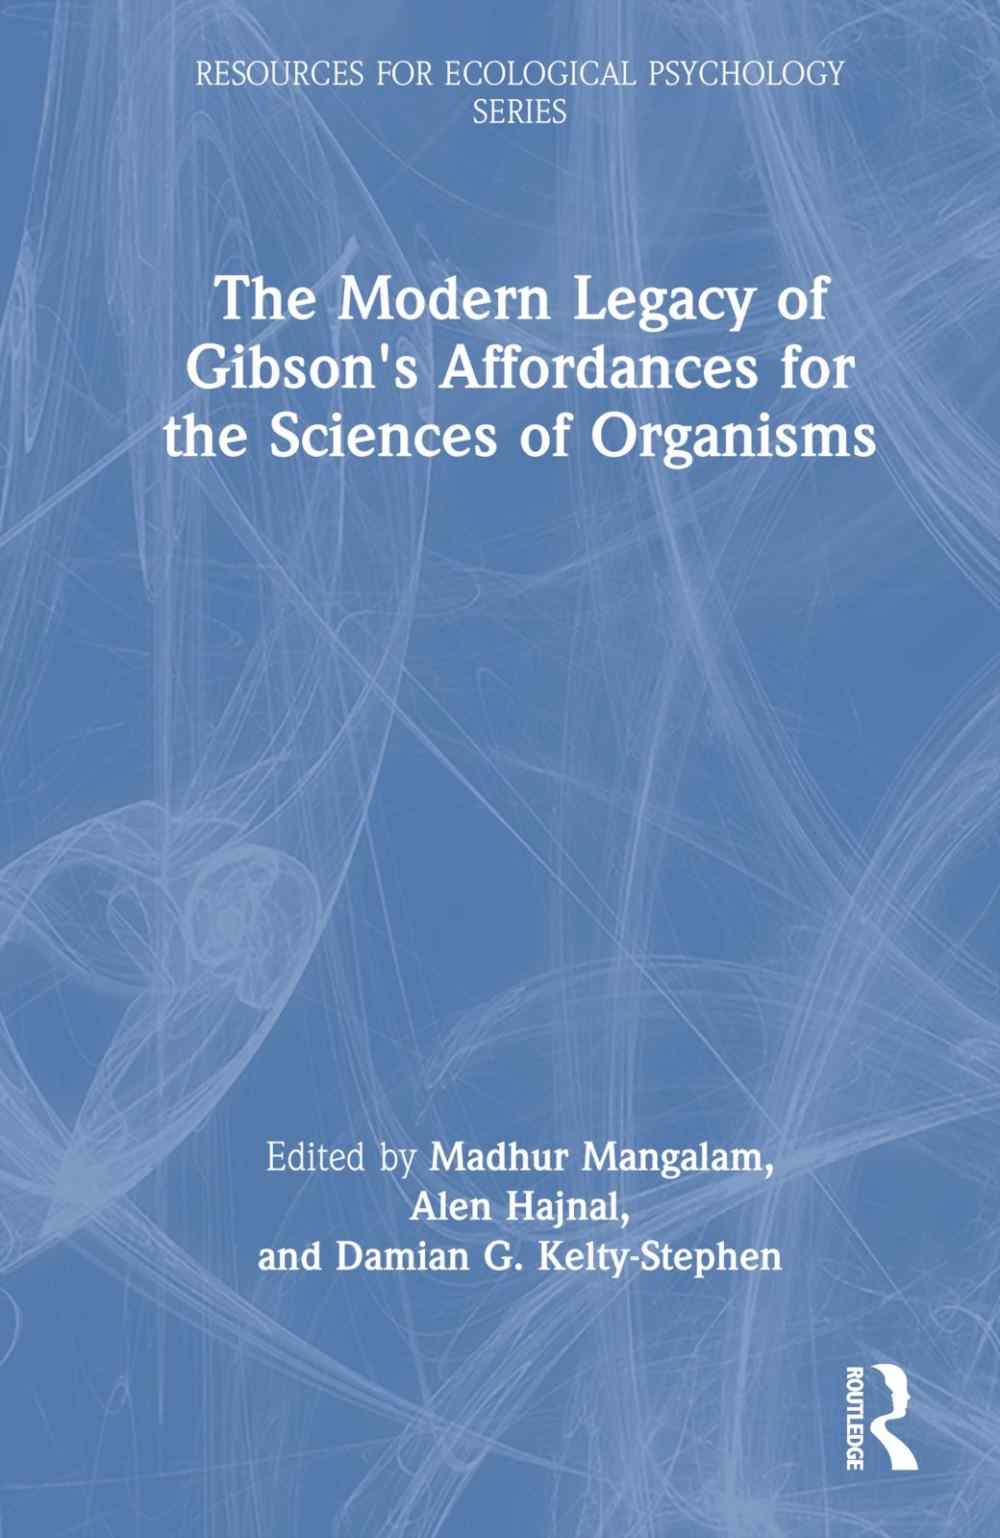 The Modern Legacy of Gibson’s Affordances for the Sciences of Organisms